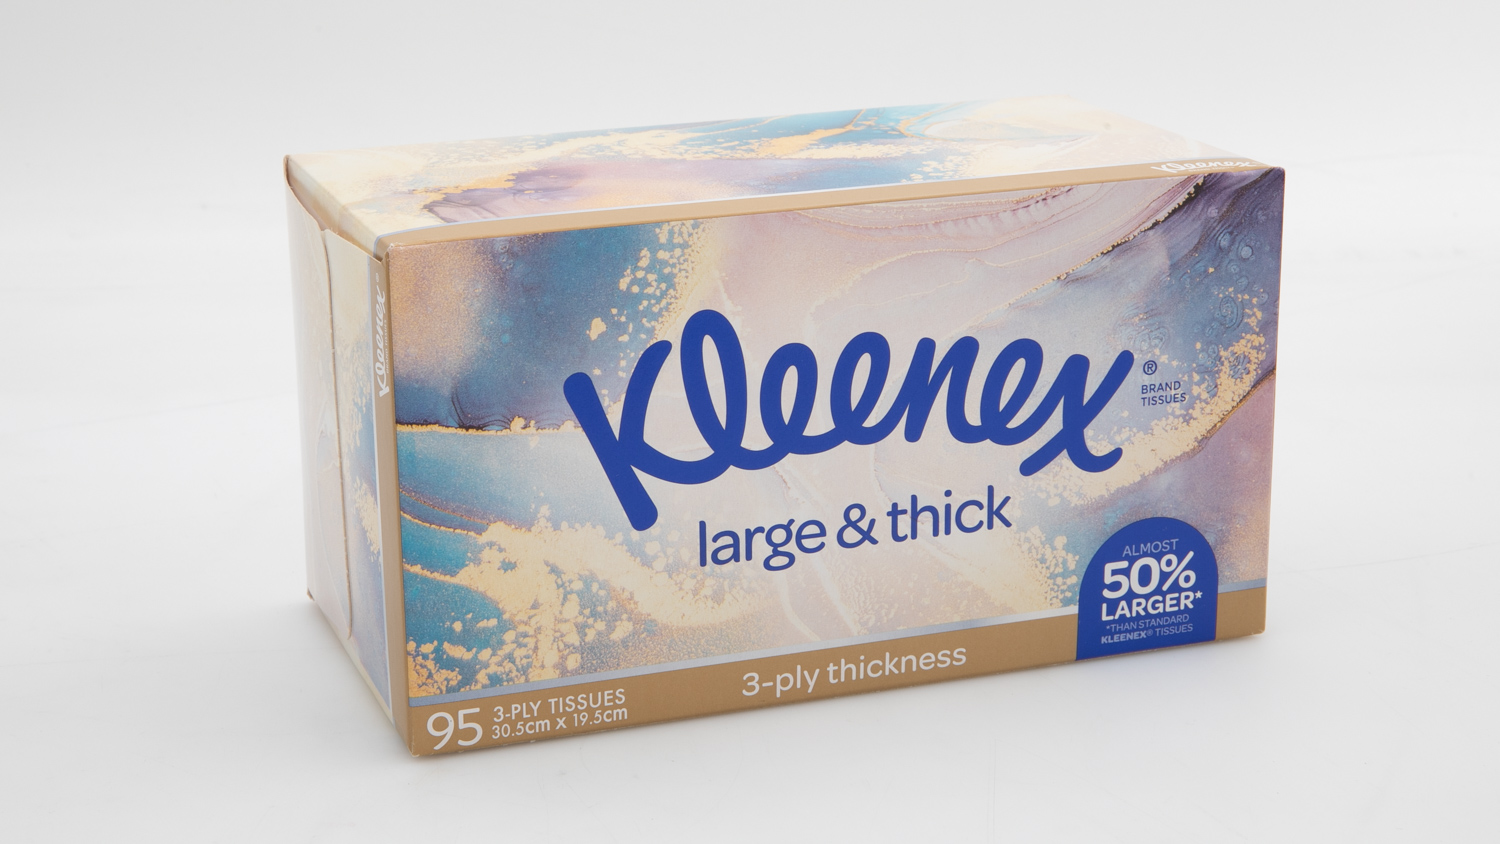 Kleenex Large & Thick 3-ply Thickness 95 tissues carousel image